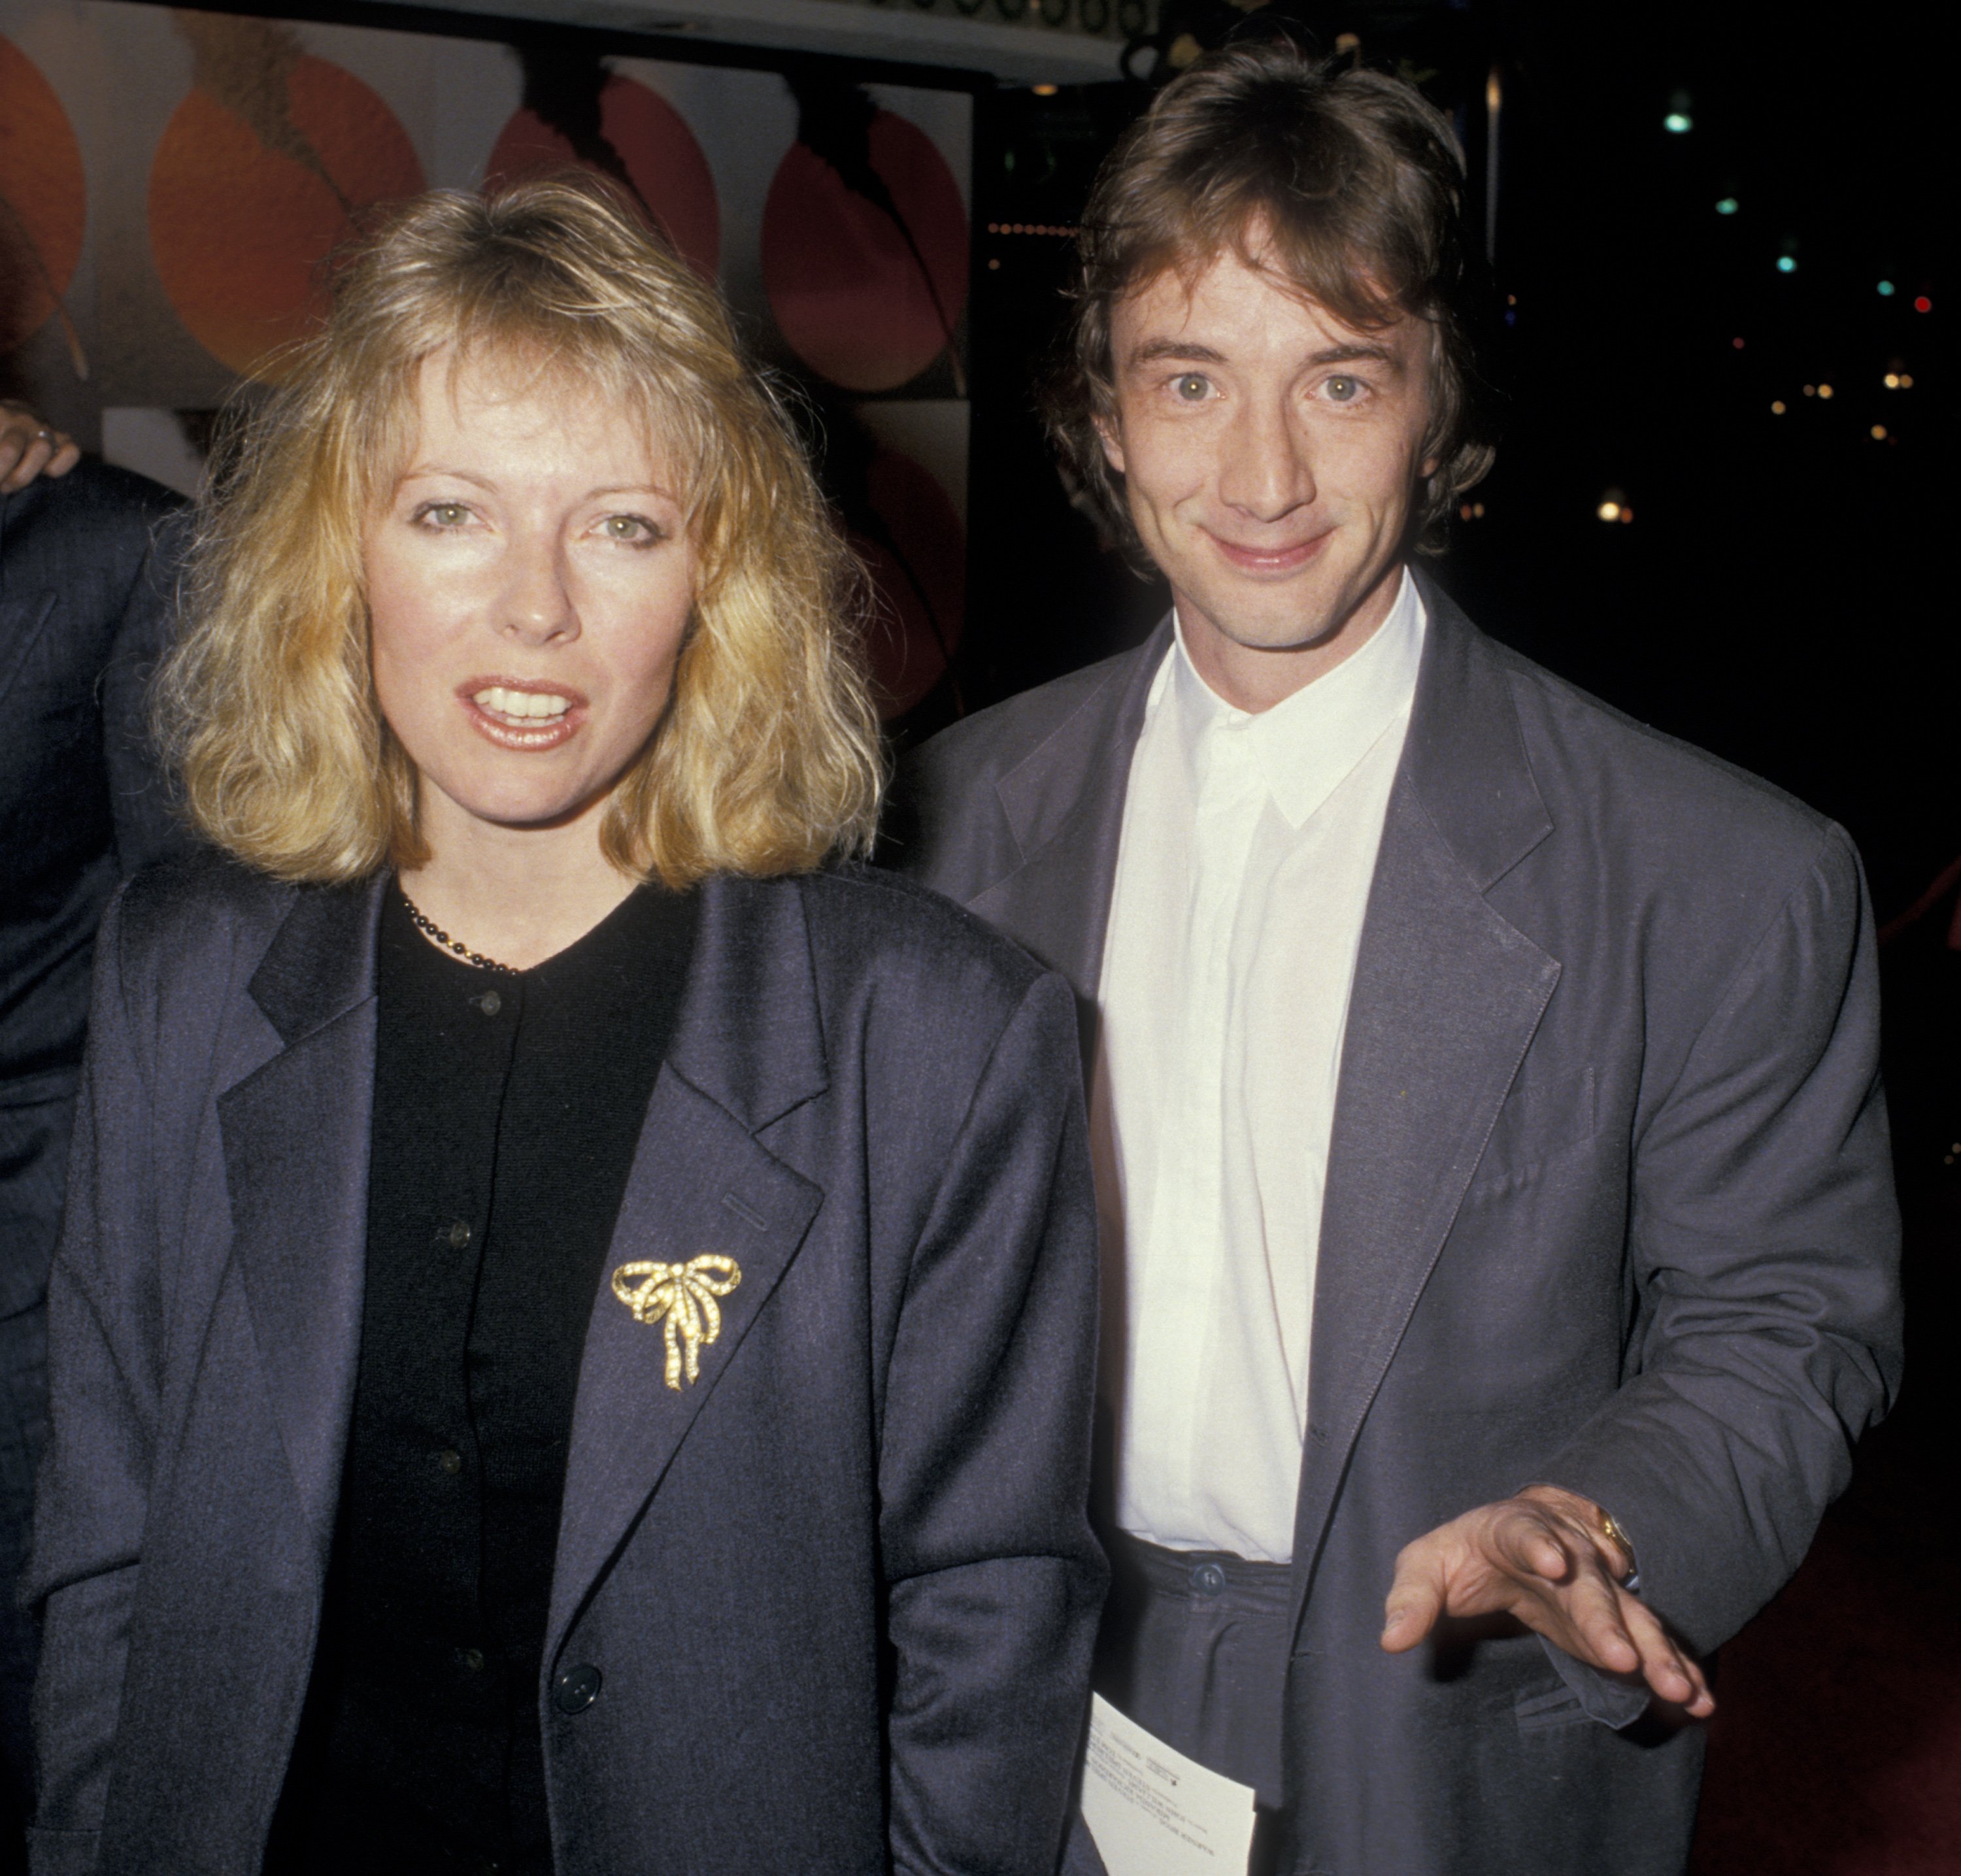 Actor Martin Short and wife Nancy Dolman attending the premiere of 'Empire of the Sun' on December 8, 1987 at Mann Village Theater in Westwood, California. | Source: Getty Images